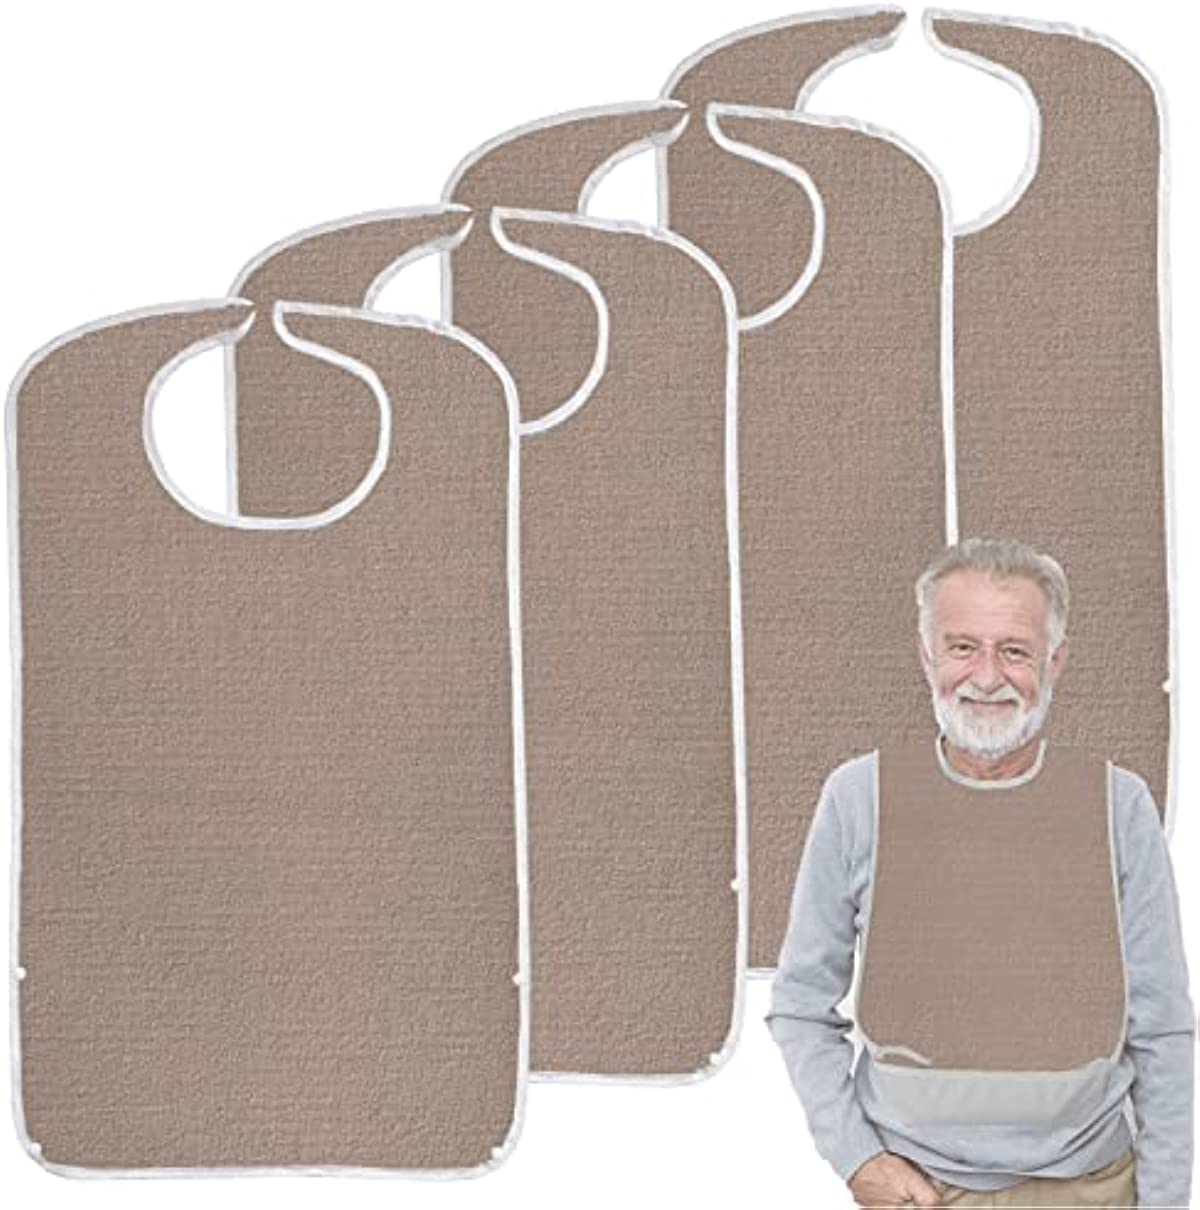 Pozico Terry Cloth Adult Bibs for Eating Women/Men/elderly Washable,Clothing Protectors & Adult Bibs with Debris Trap